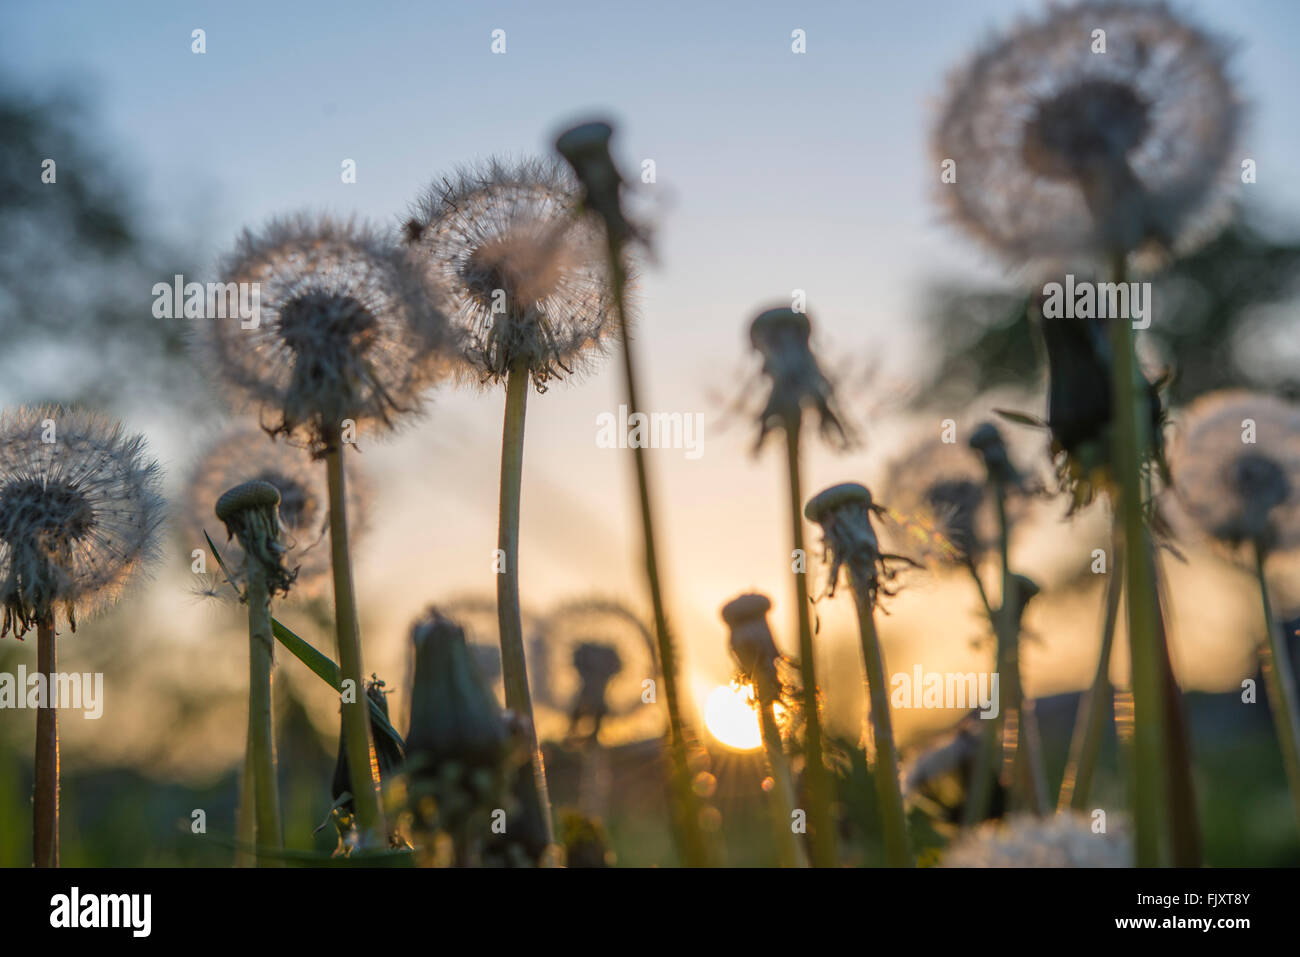 Low Angle View Of Dandelion Growing On Field During Sunset Stock Photo